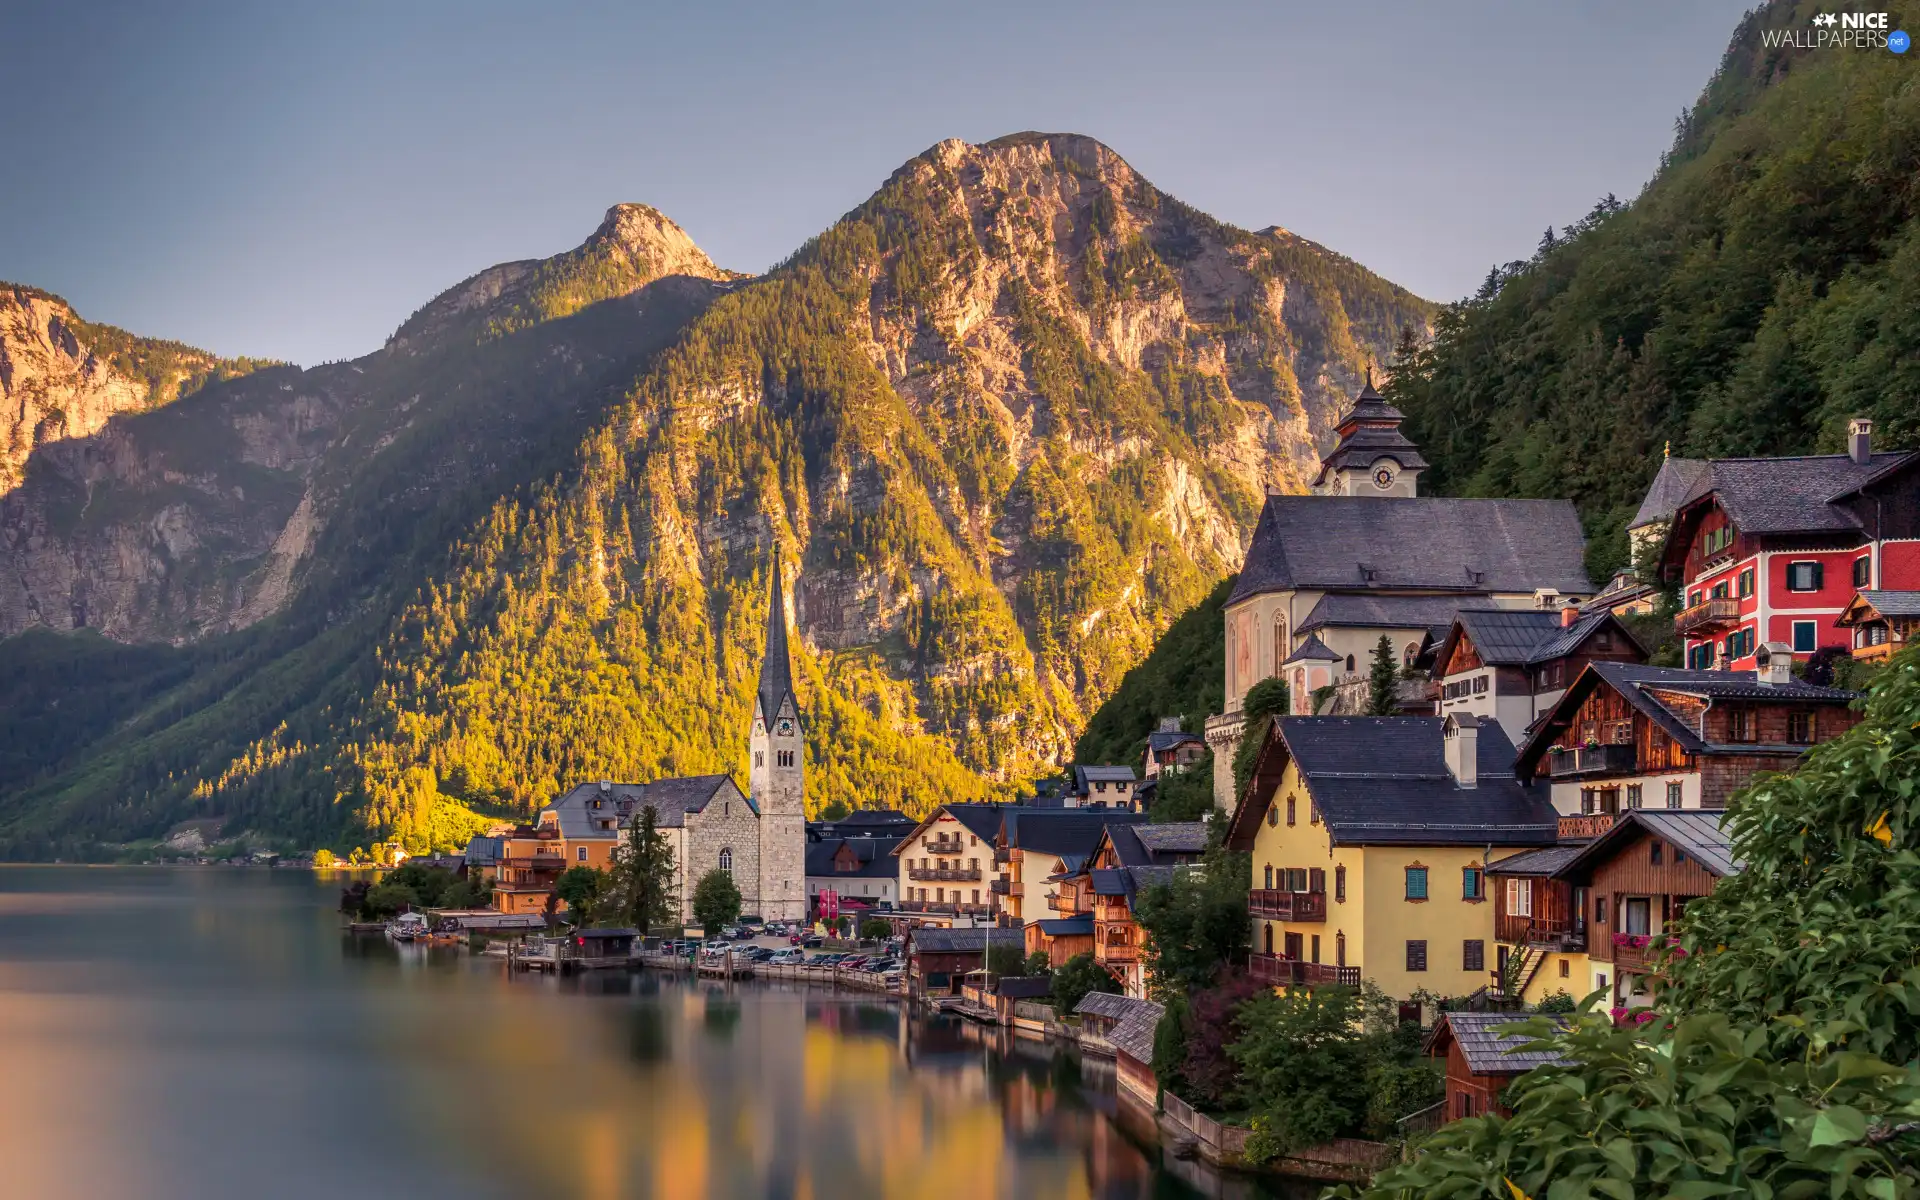 Mountains, Great Sunsets, Hallstattersee Lake, Houses, Hallstatt, Austria, viewes, Town, trees